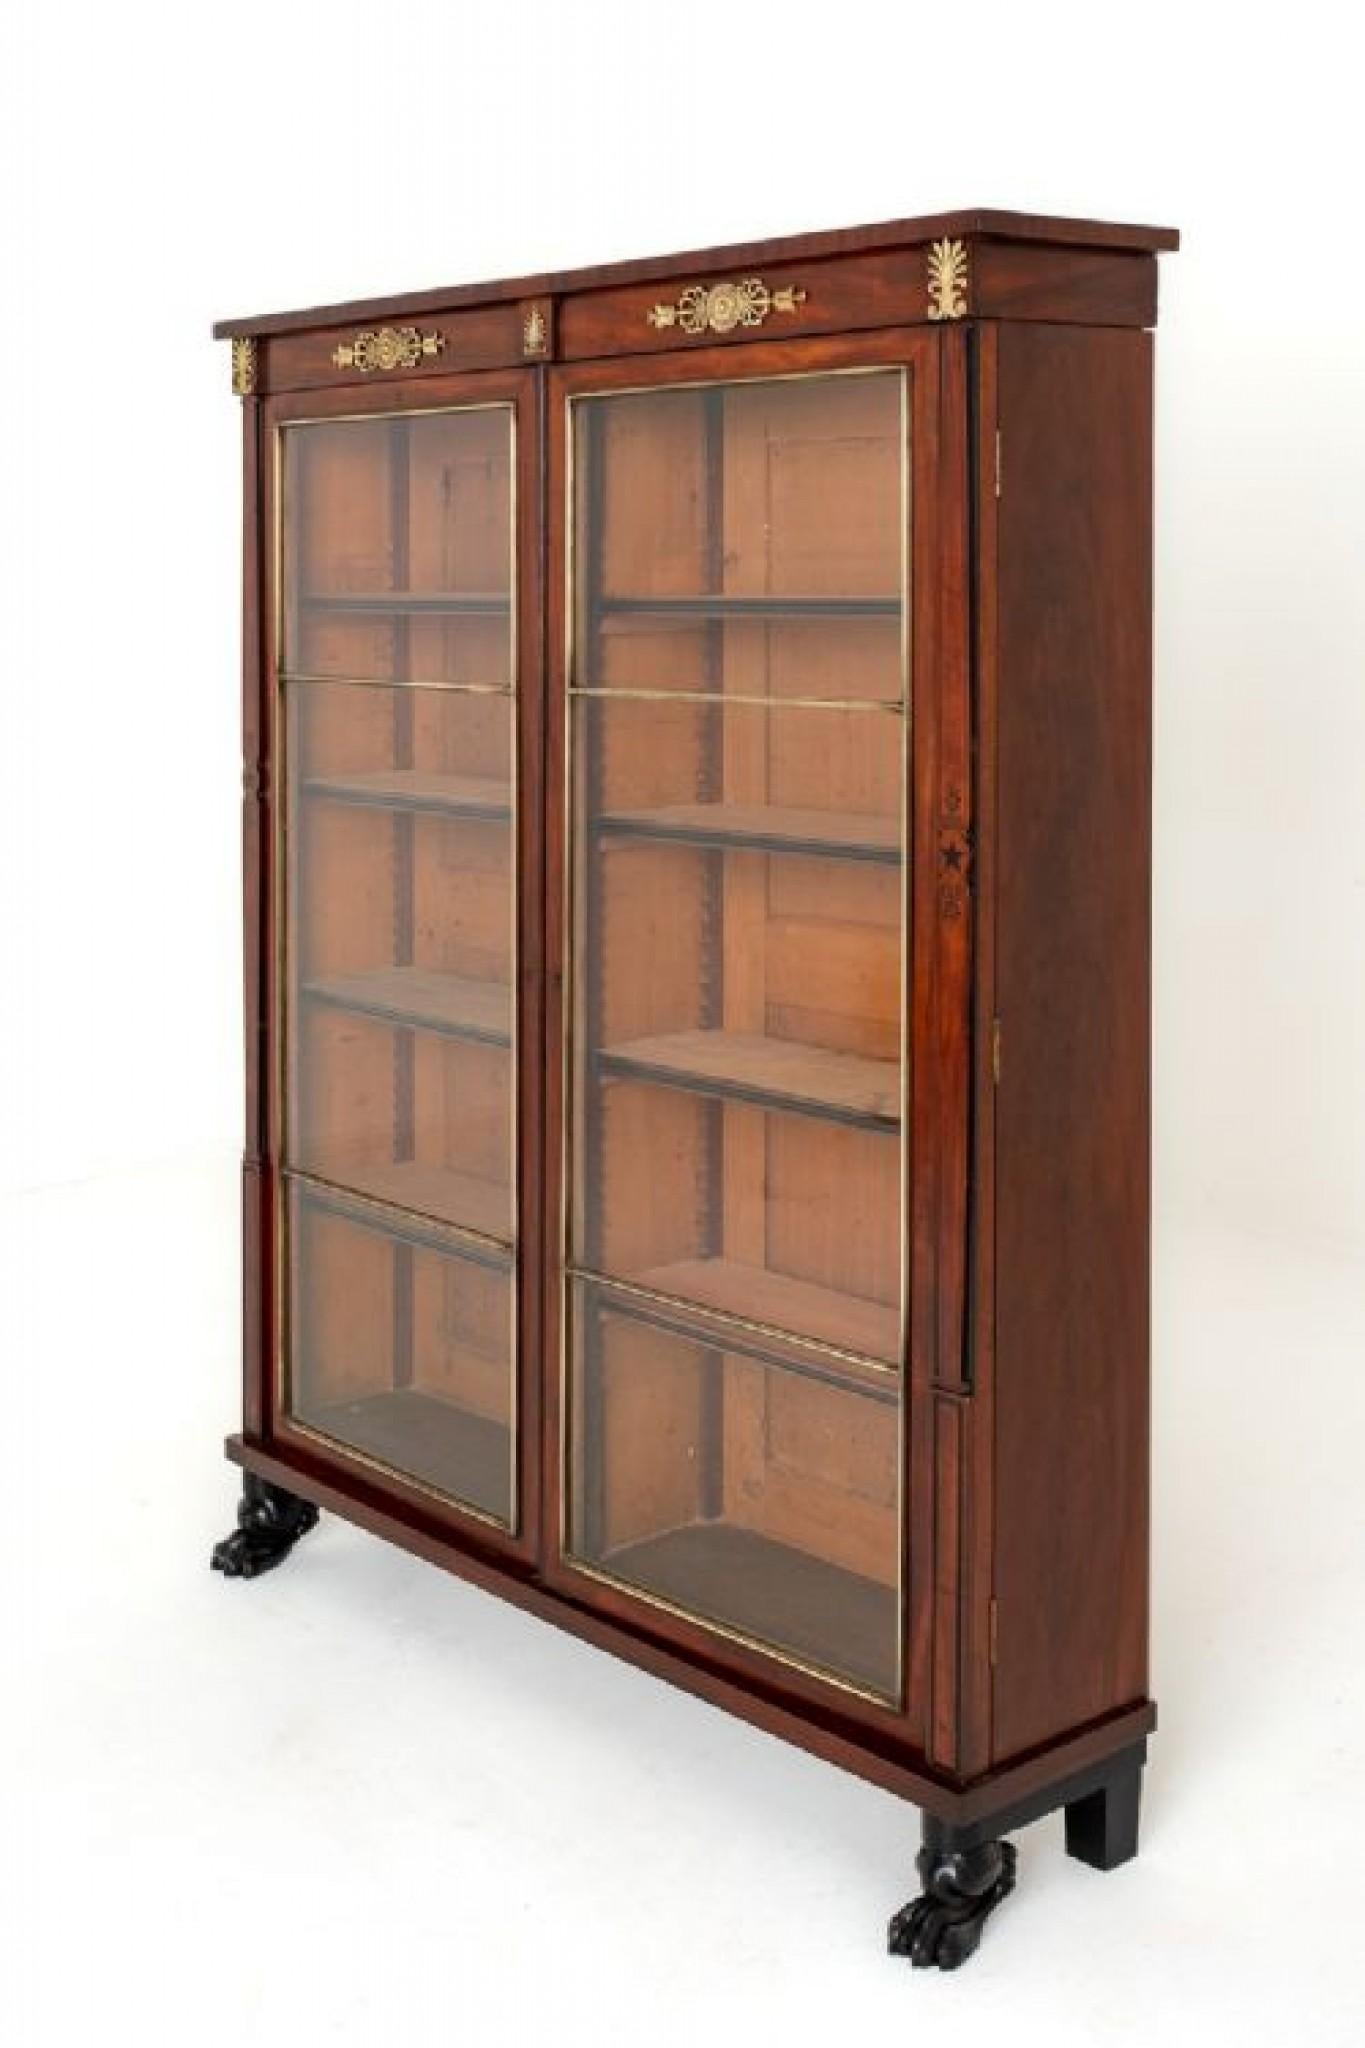 Regency Mahogany 2 Door Glazed Bookcase.
This Impressive Regency Bookcase Stands Upon Carved Ebonised Lions Paw Feet.
Period Regency
Having 2 Glazed Doors which Feature Typical Regency Brass Moldings.
The Doors Being Flanked by Pilasters with